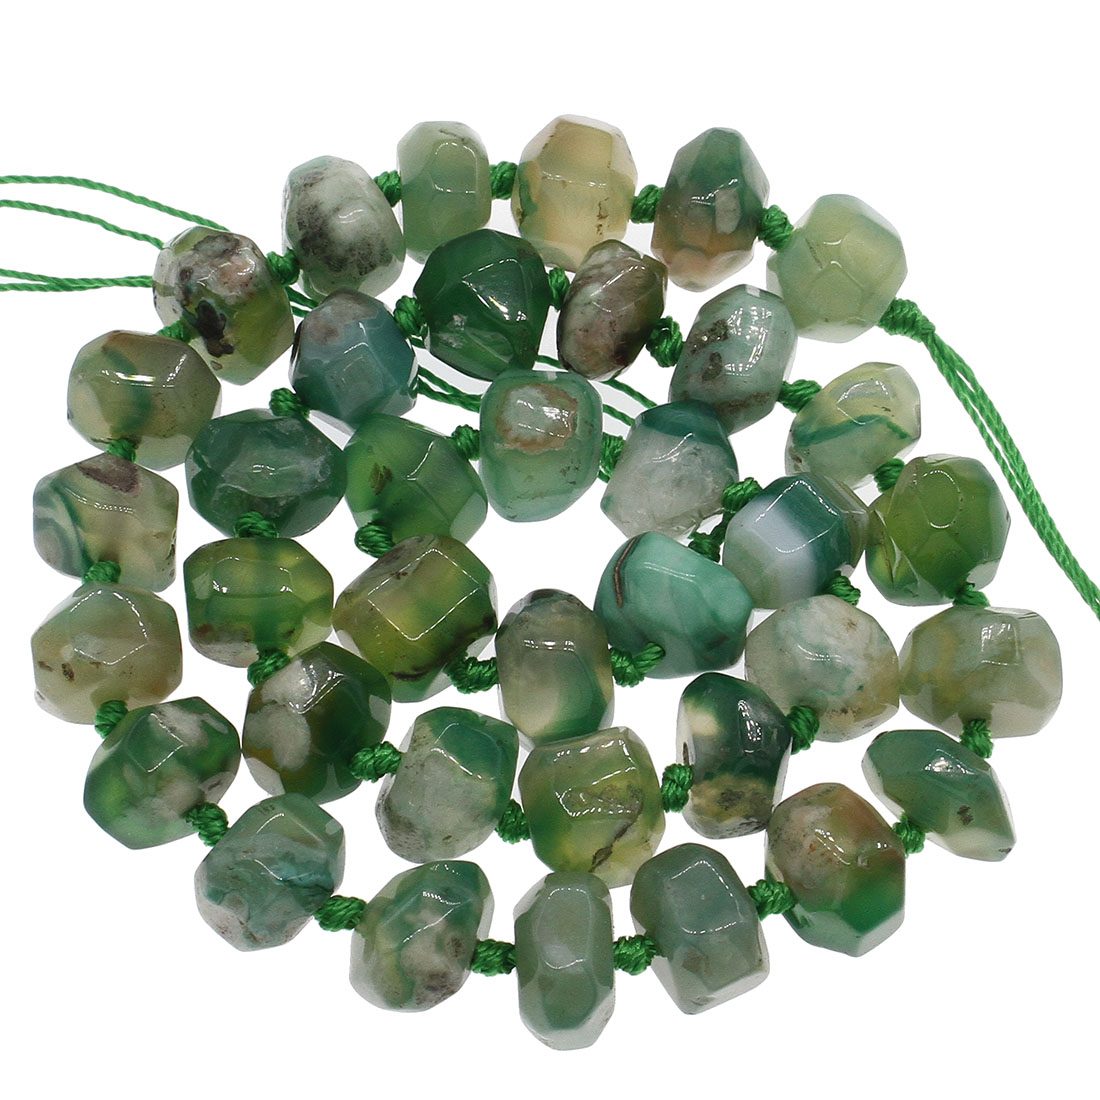  Green Lace Agate